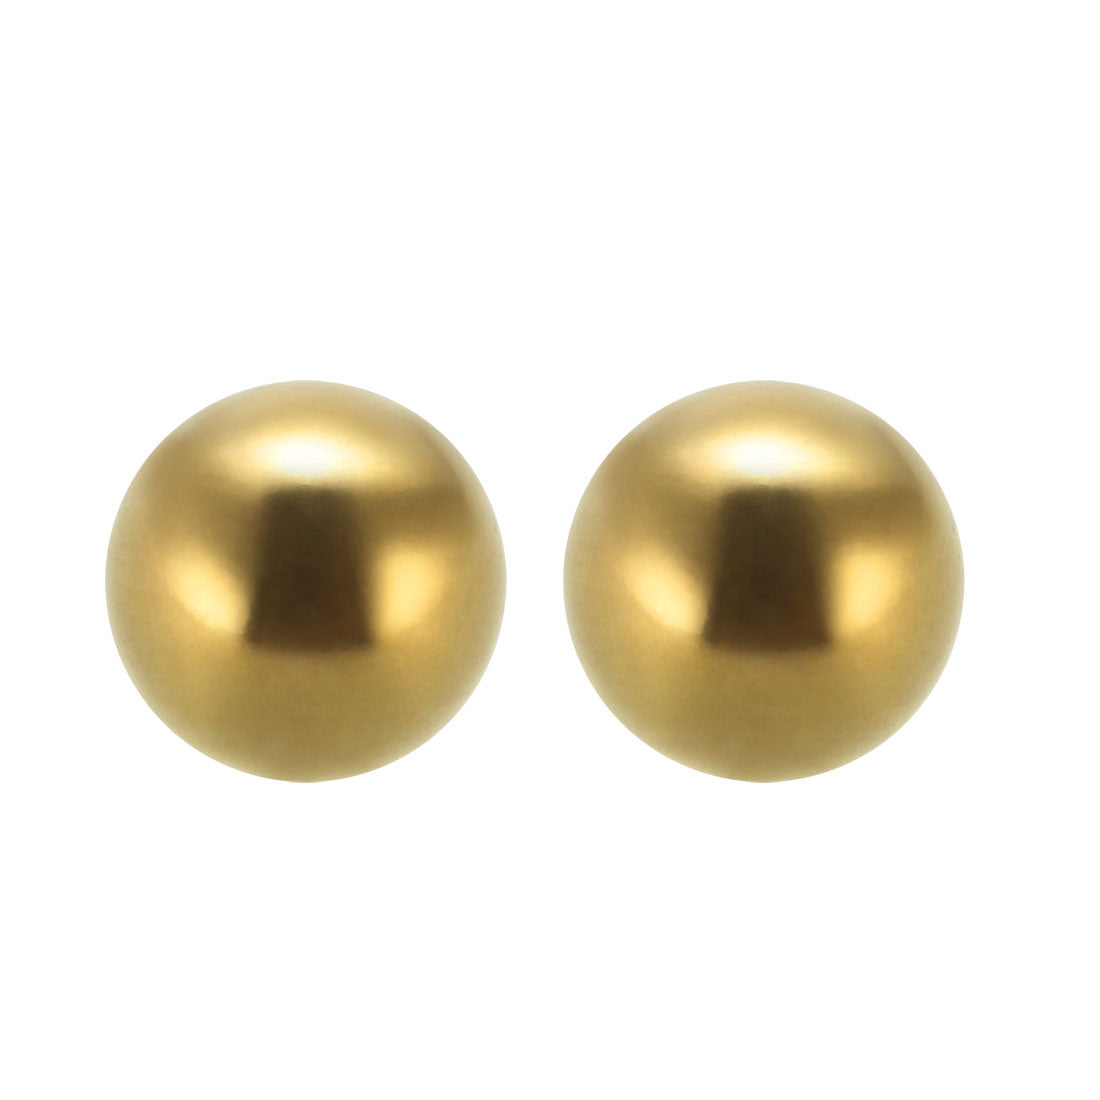 Uxcell Uxcell 3/8" Precision Solid Brass Bearing Balls 25pcs